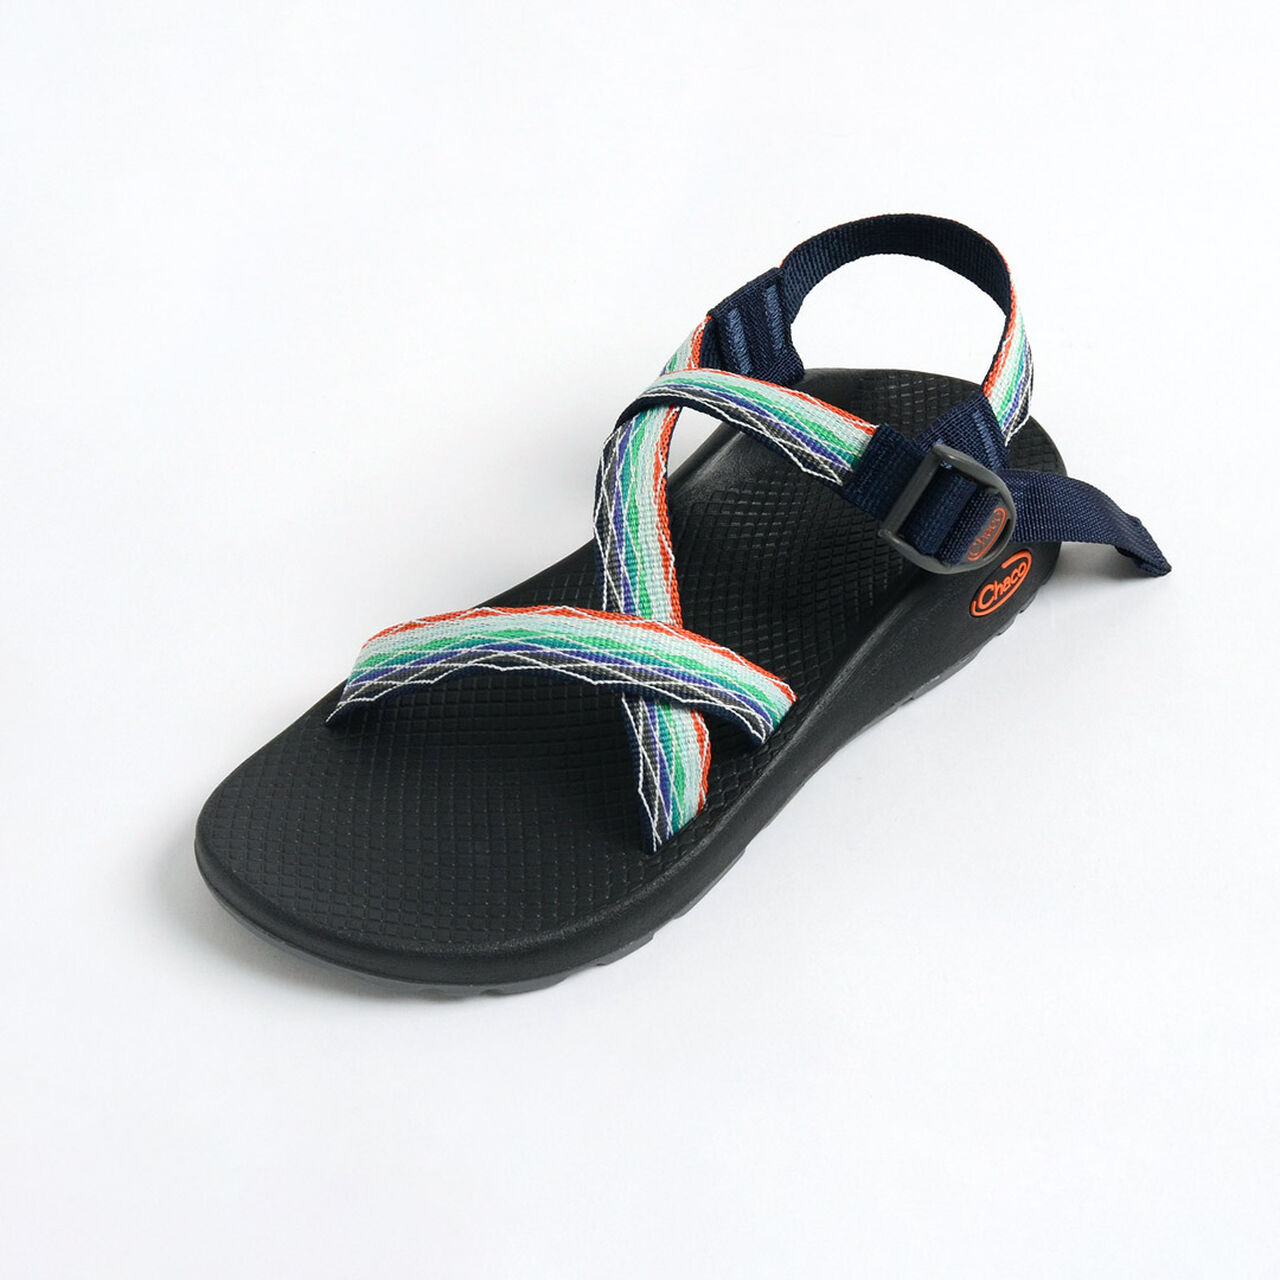 Z1 Sandals Classic,PrismMint, large image number 0